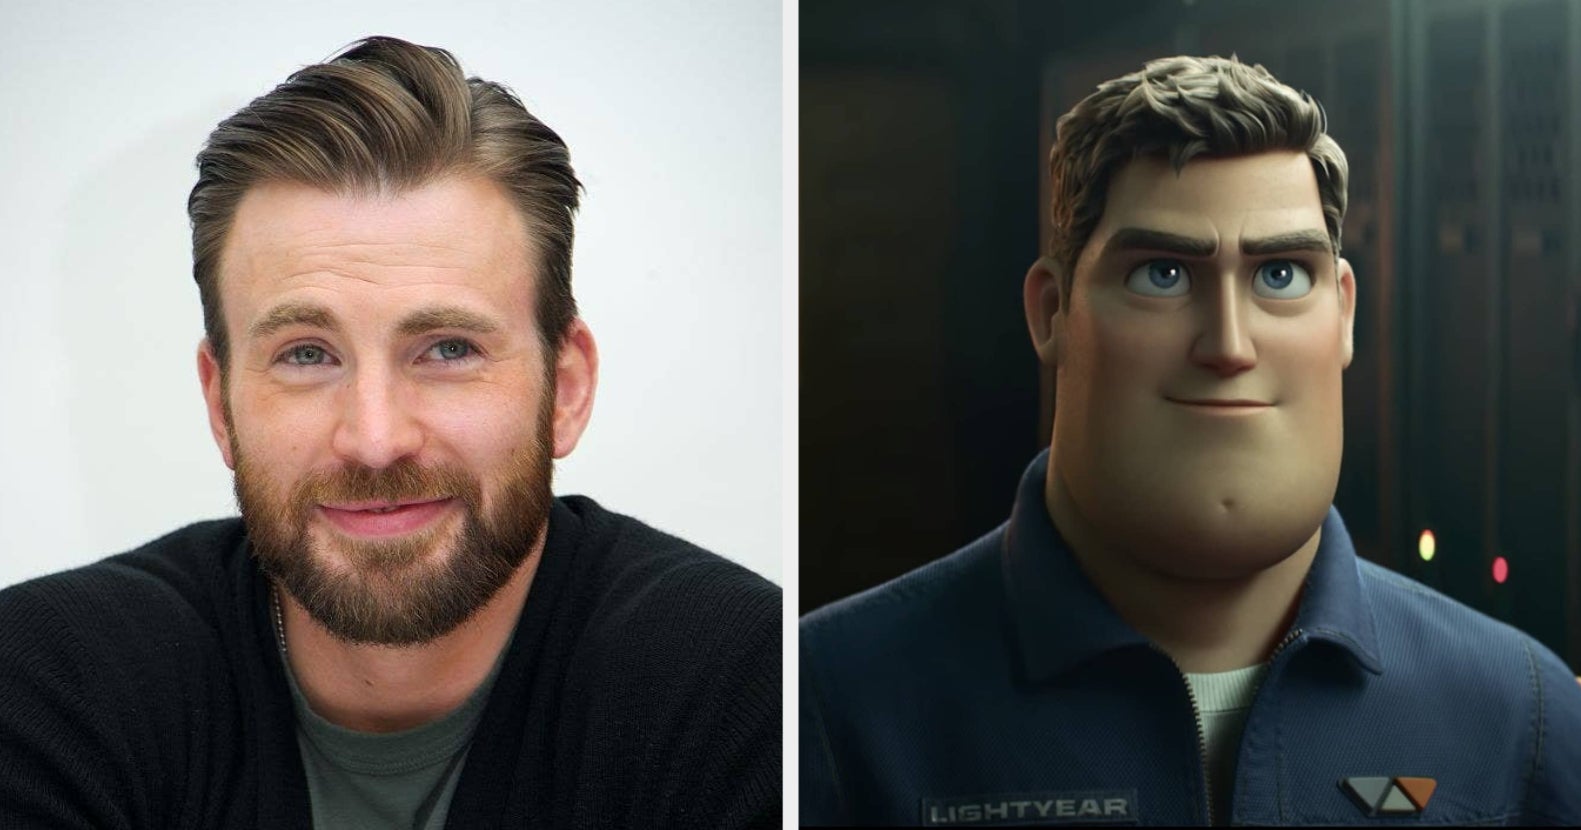 Chris Evans' Reaction To Lightyear First Trailer